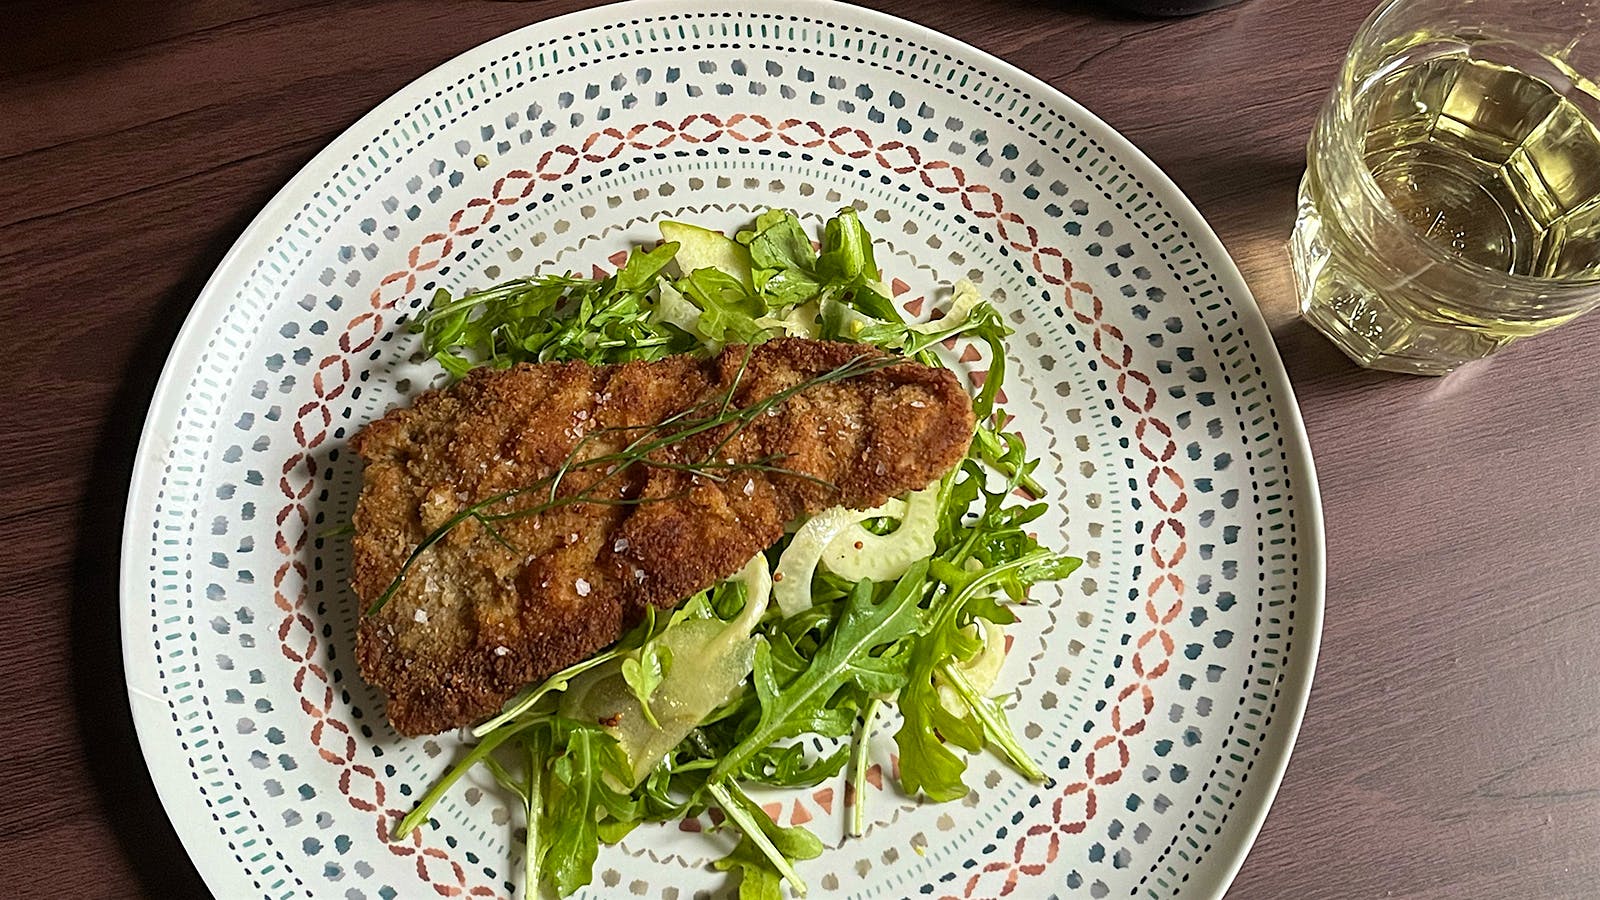 8 & $20: Crispy Veal with Fennel-Apple-Arugula Salad and a German White Wine